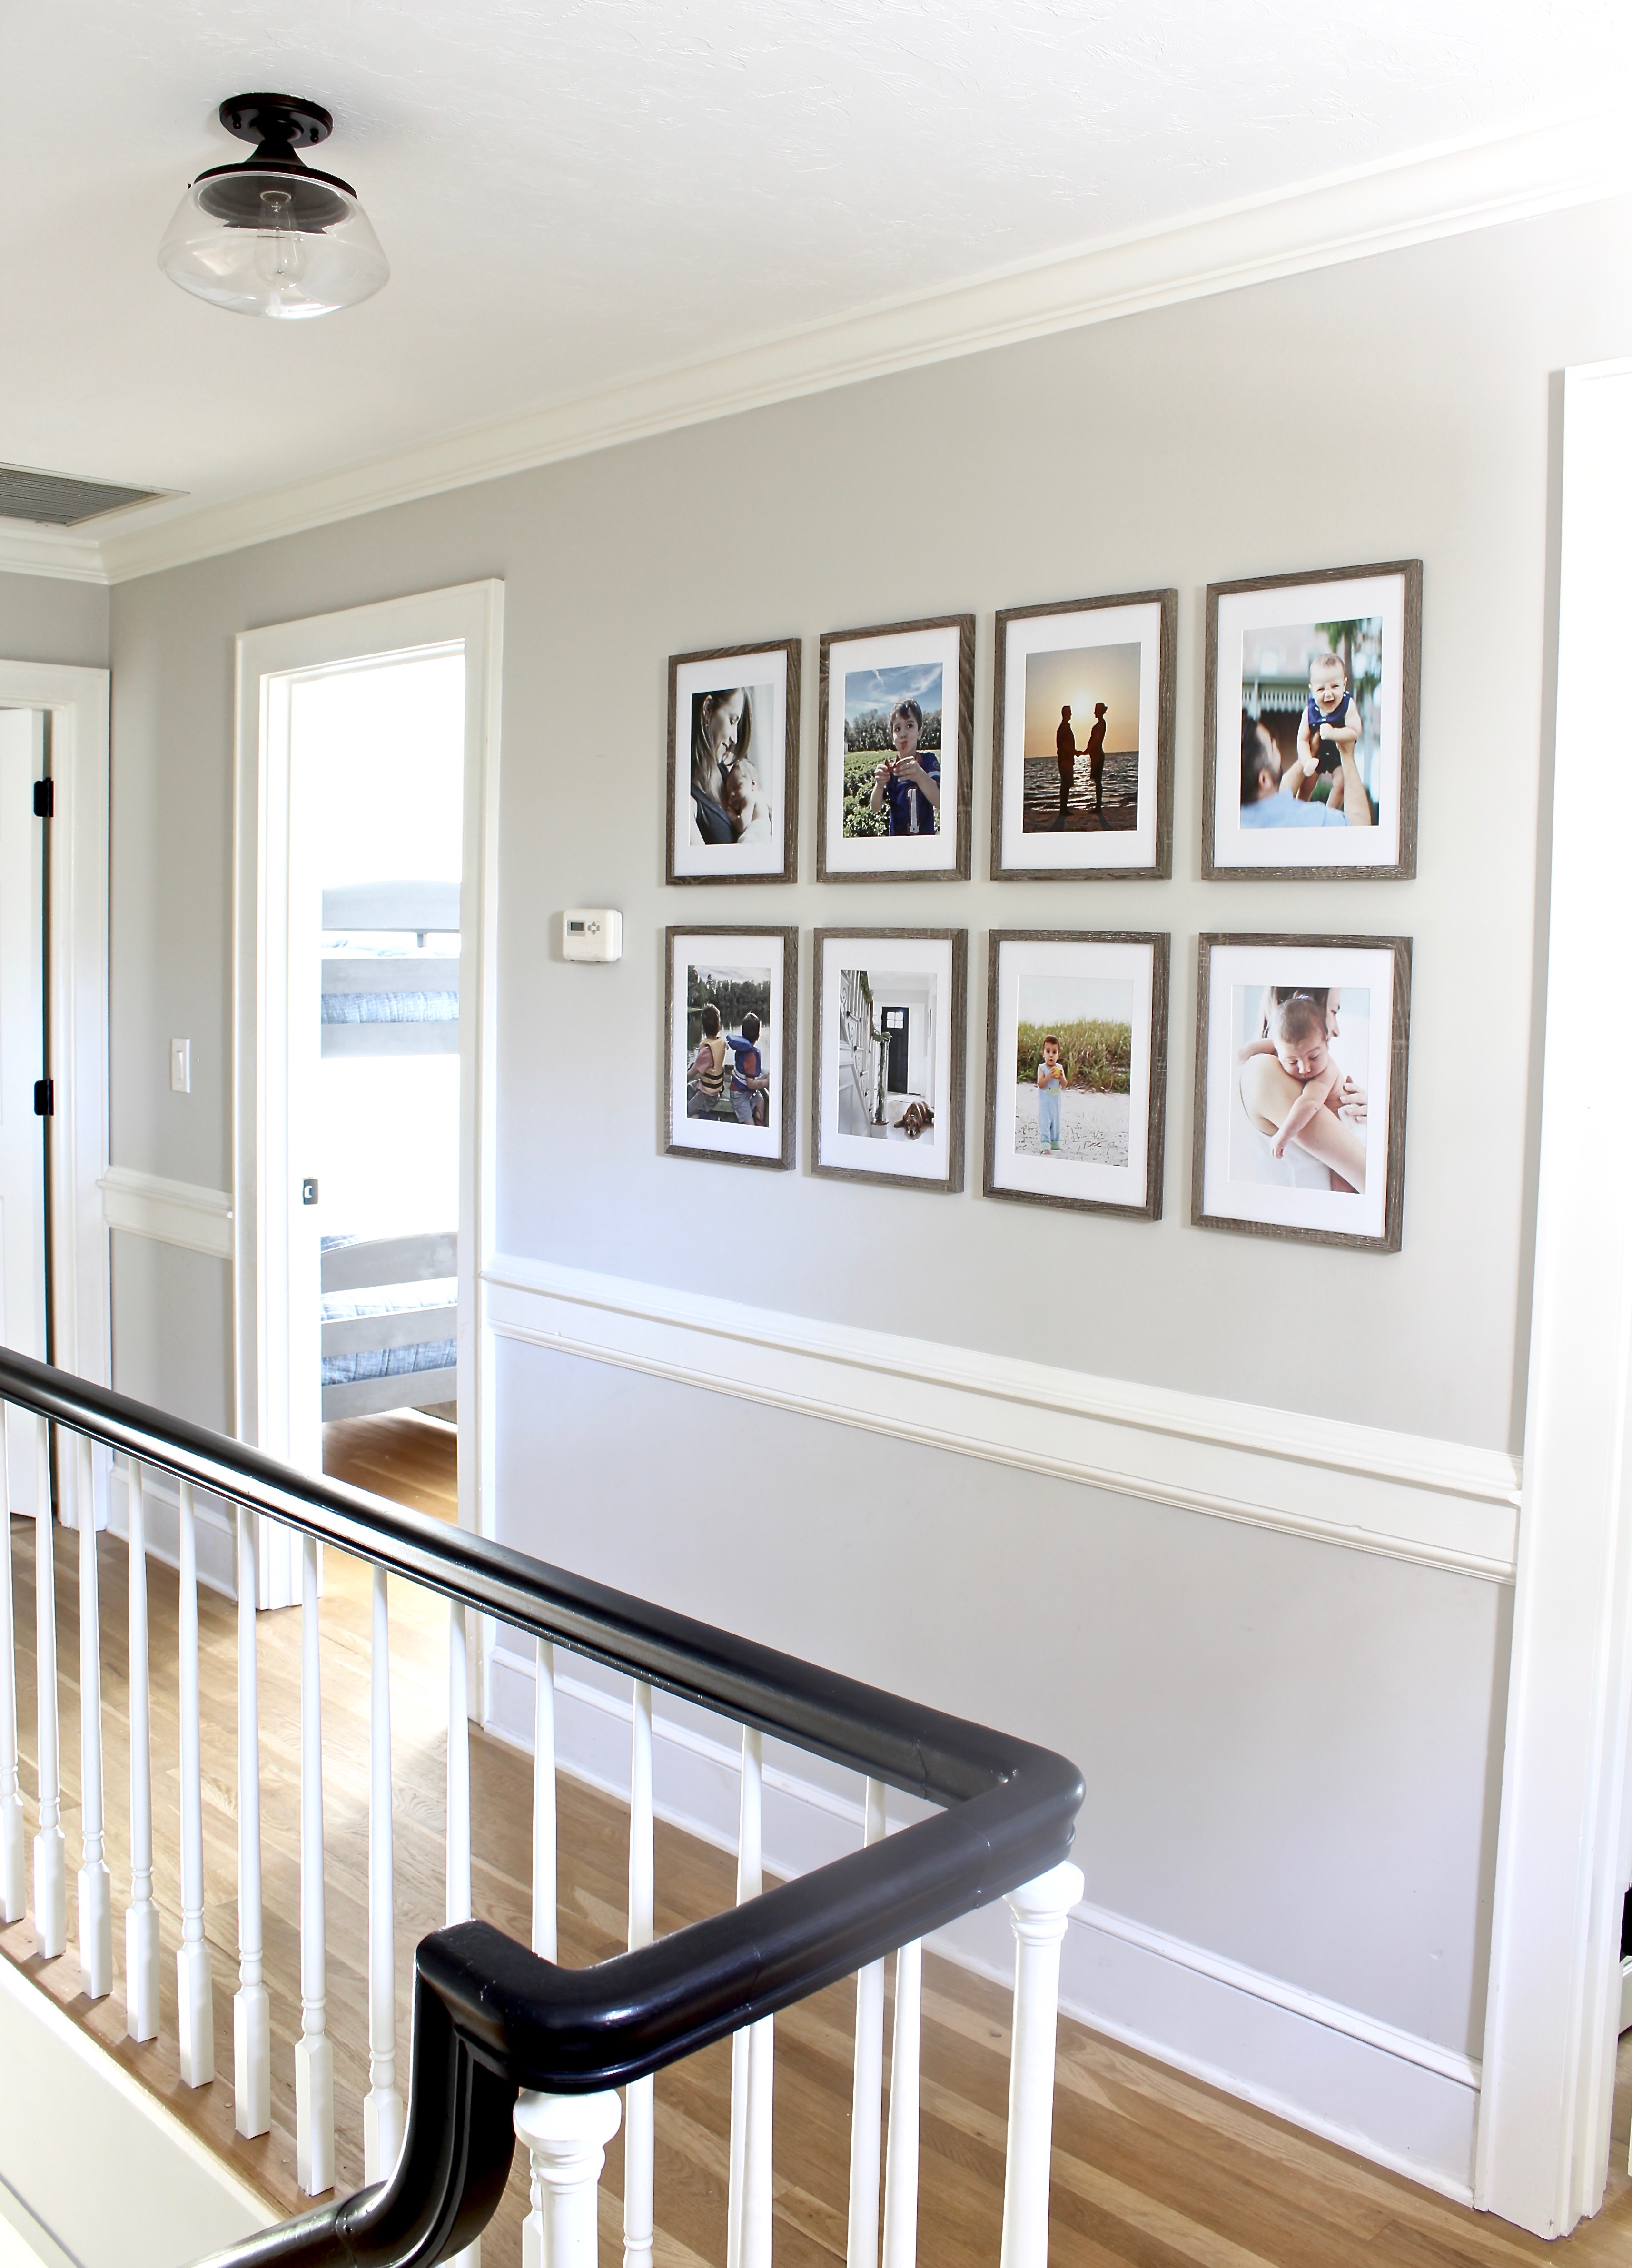 How to measure and hang a grid gallery wall! Dining room art with  affordable custom frames & hardware / Create / Enjoy